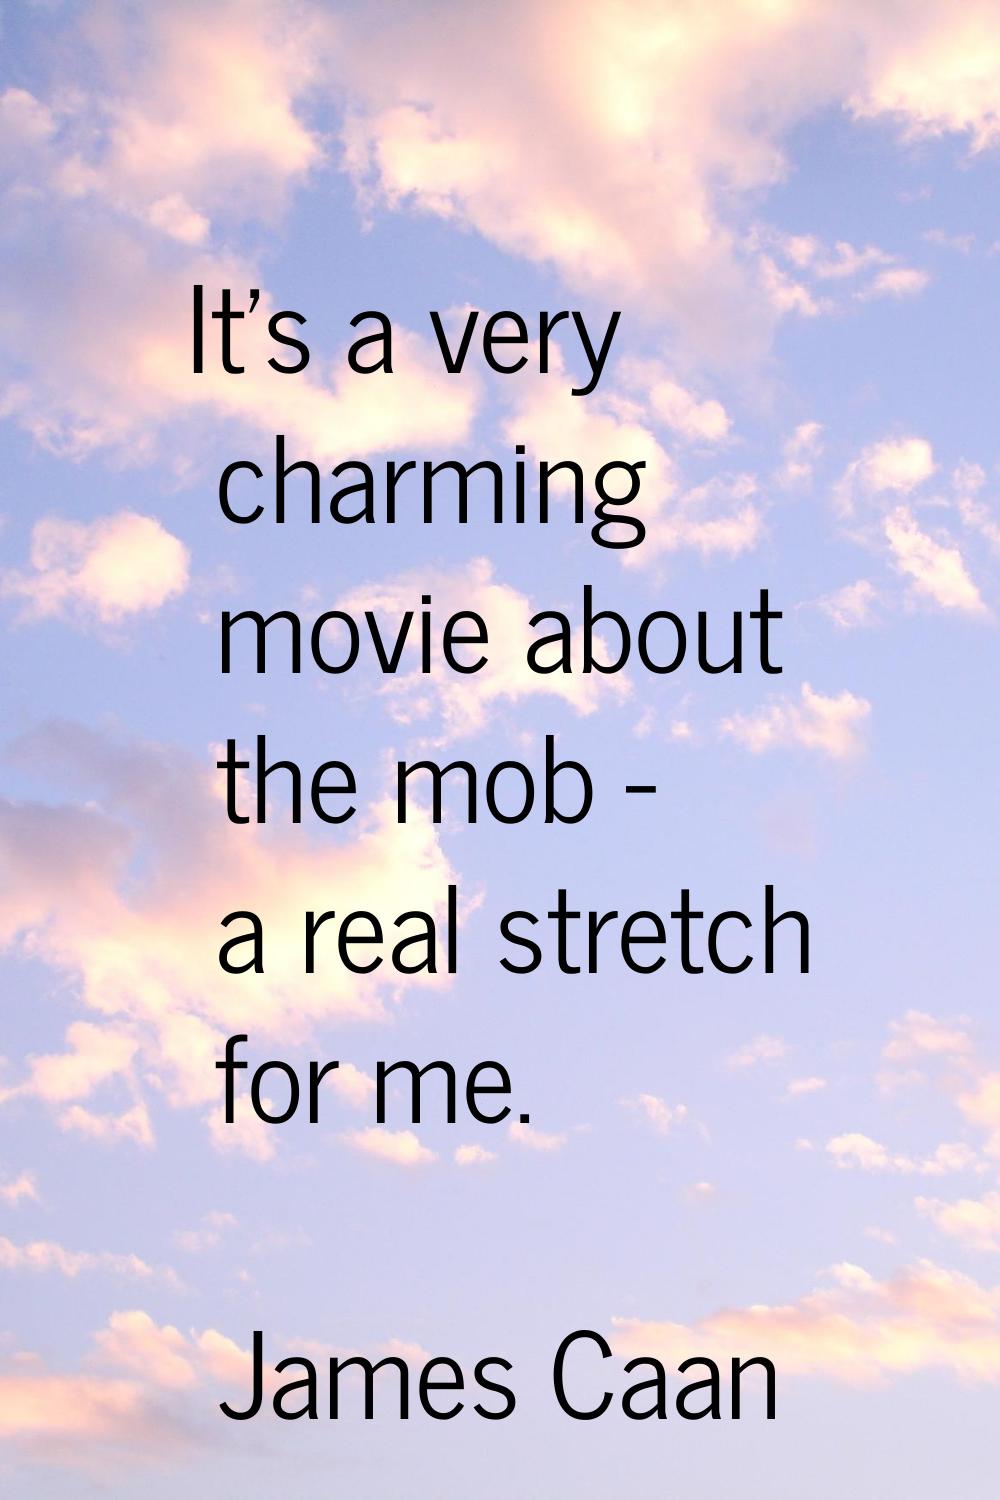 It's a very charming movie about the mob - a real stretch for me.